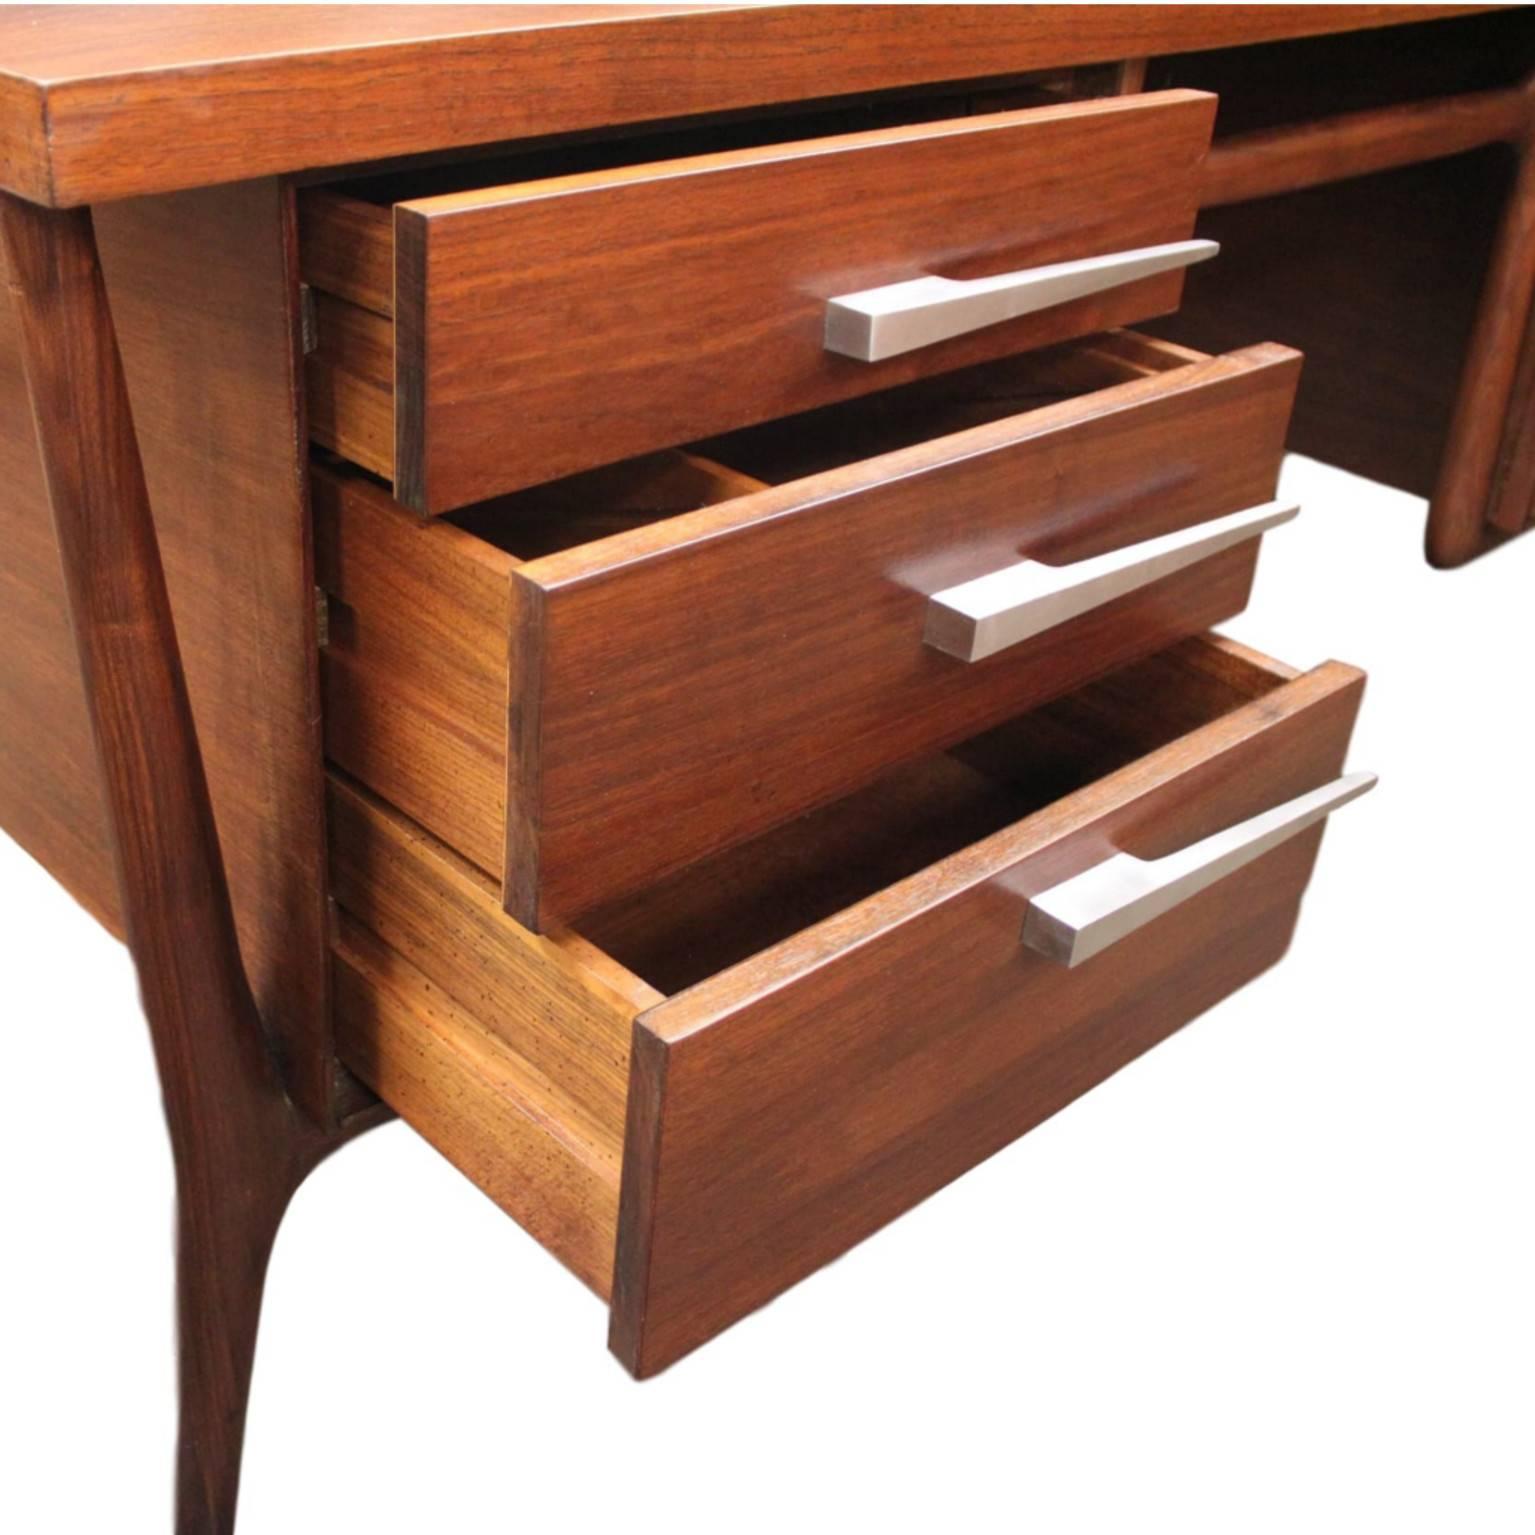 Mid-20th Century Iconic 1950s Mid-Century Modern Walnut Executive Desk by Leopold Desk Co.